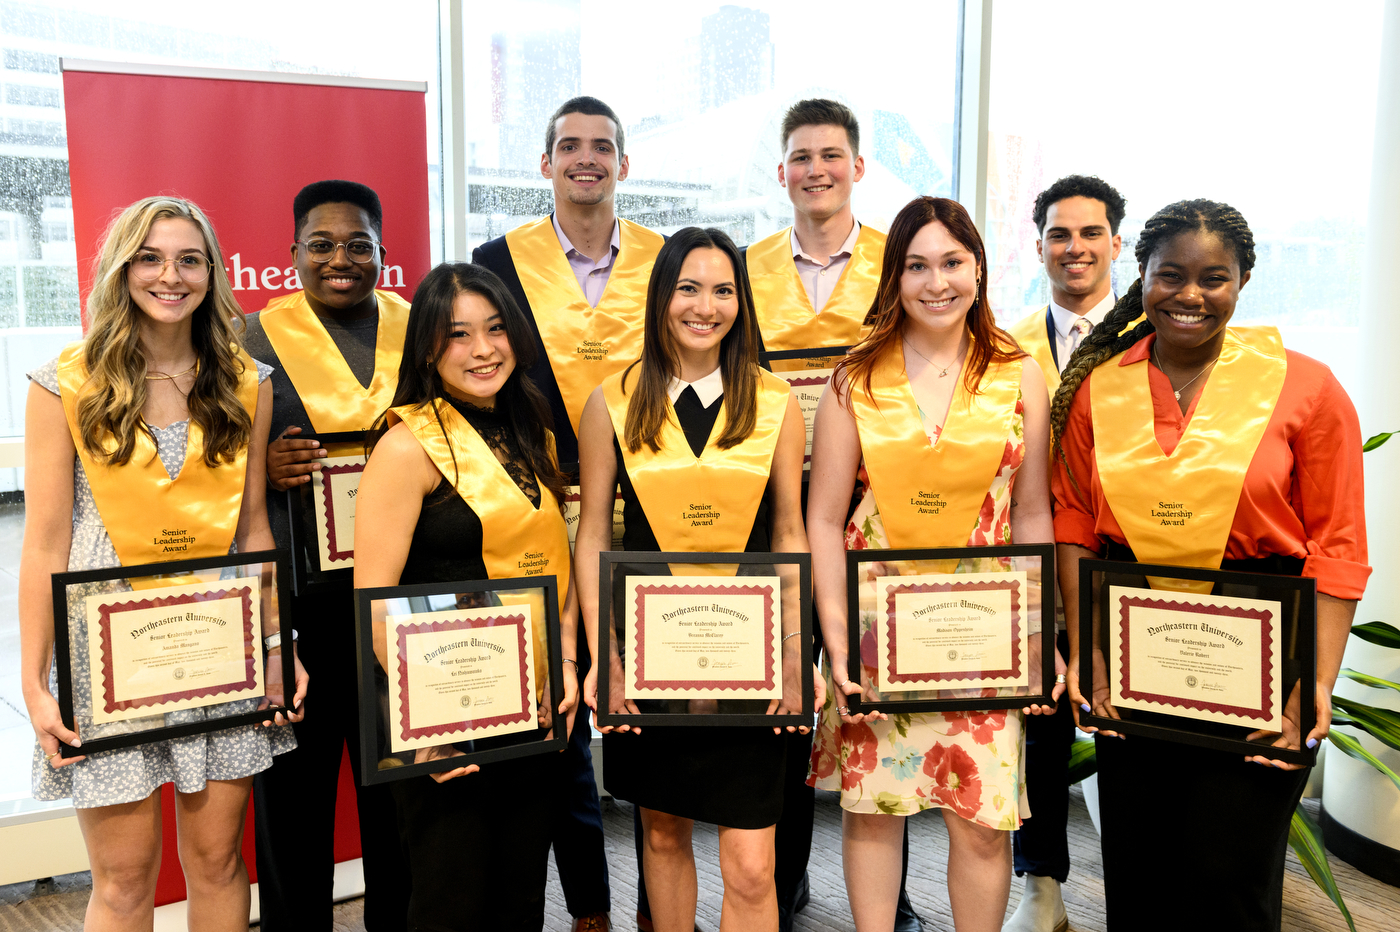 group of 9 students with gold sashes holding certificates